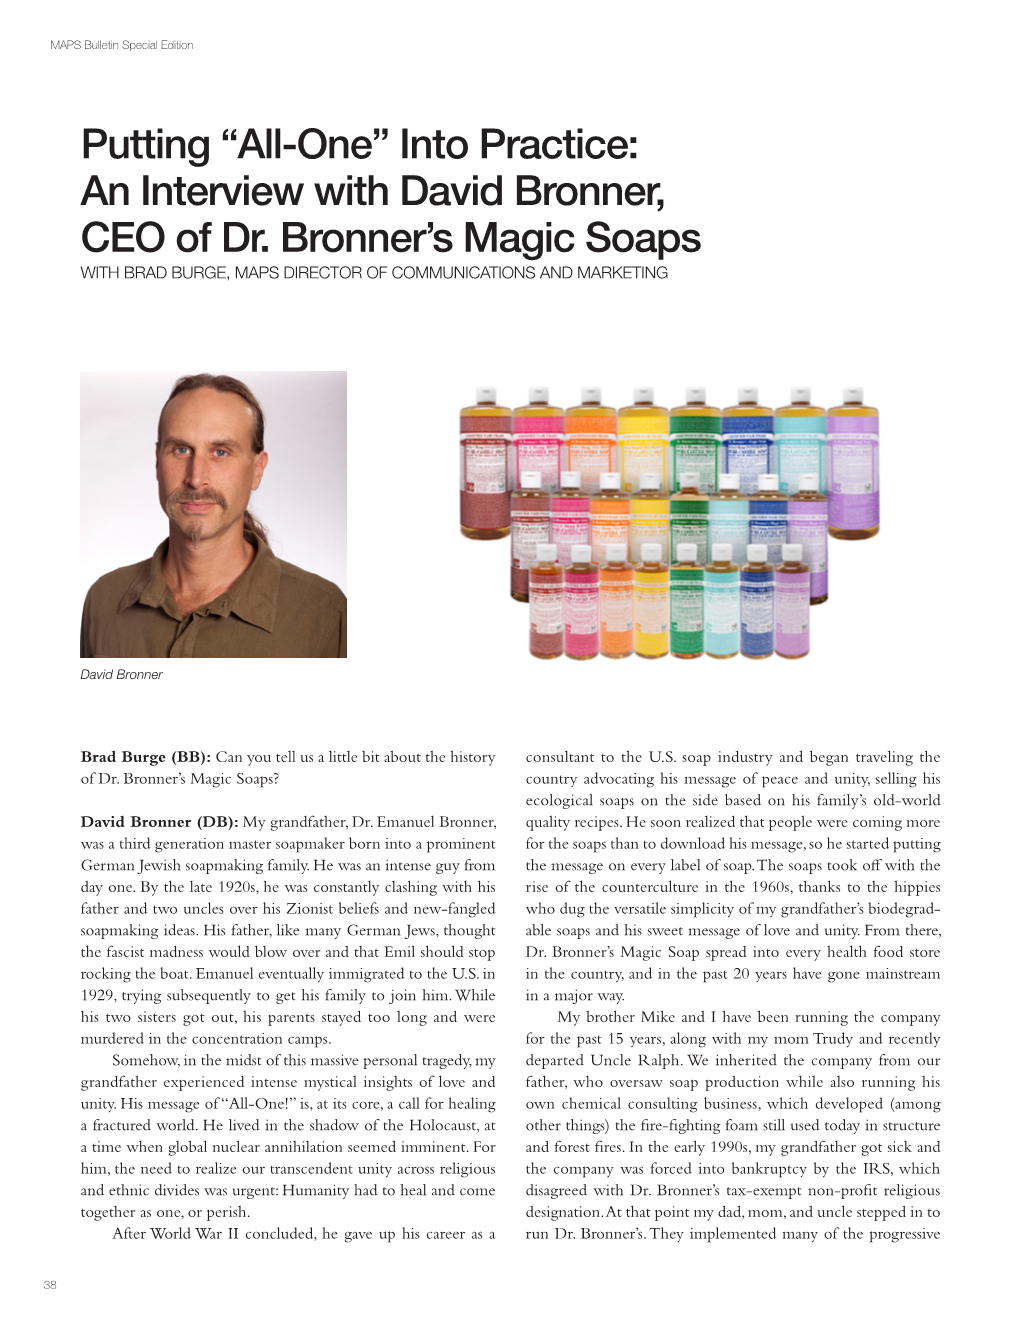 An Interview with David Bronner, CEO of Dr. Bronner's Magic Soaps